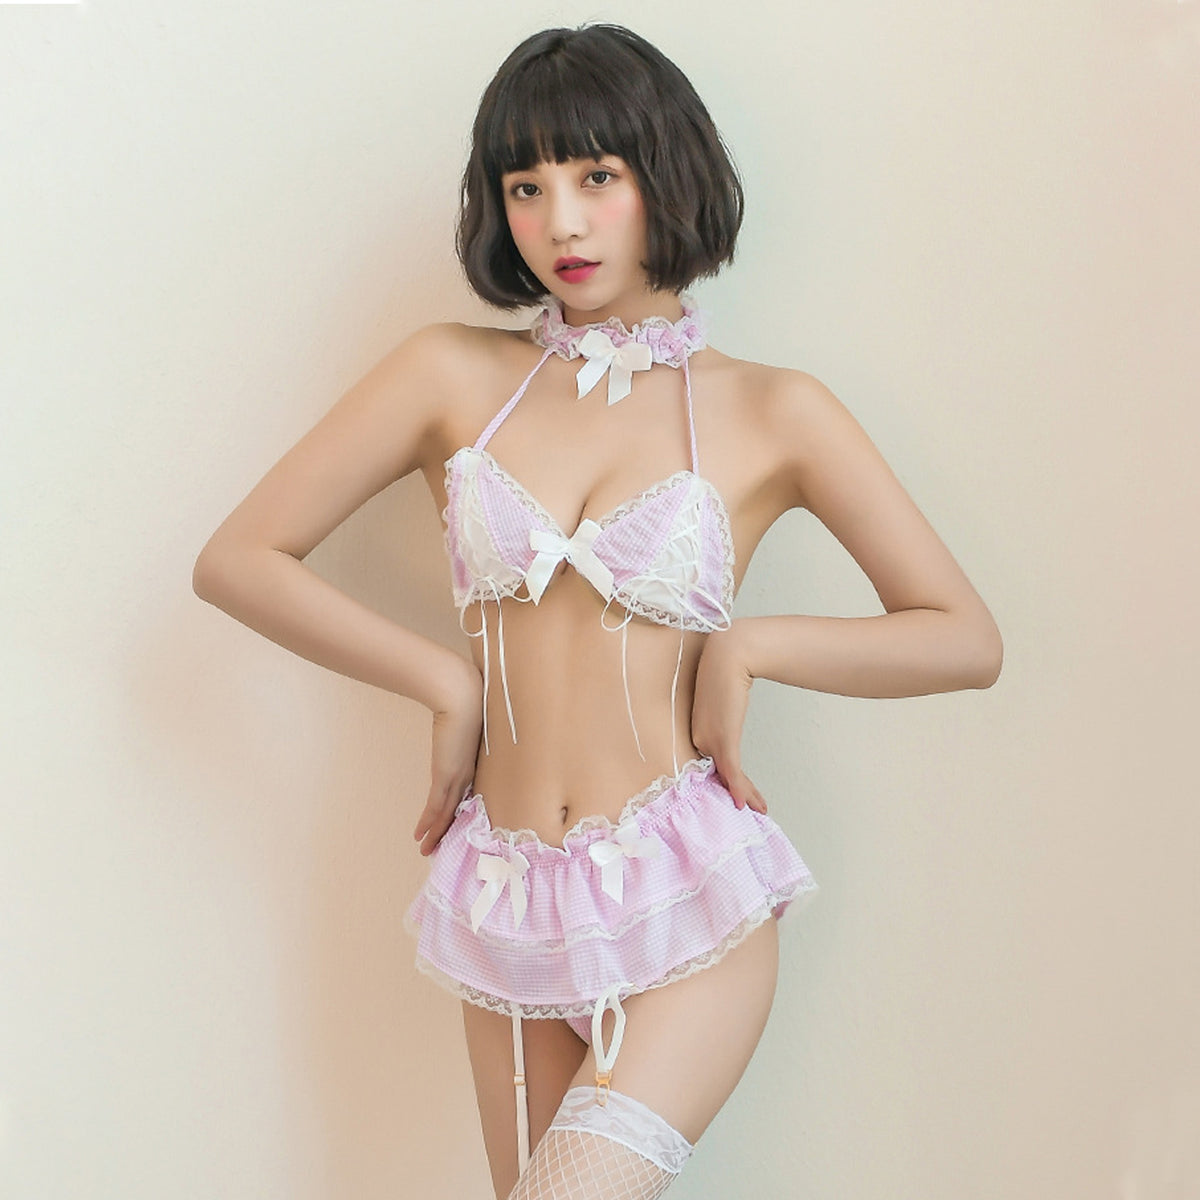 Yomorio's Lace Lolita Lingerie – Perfect for Special Occasions